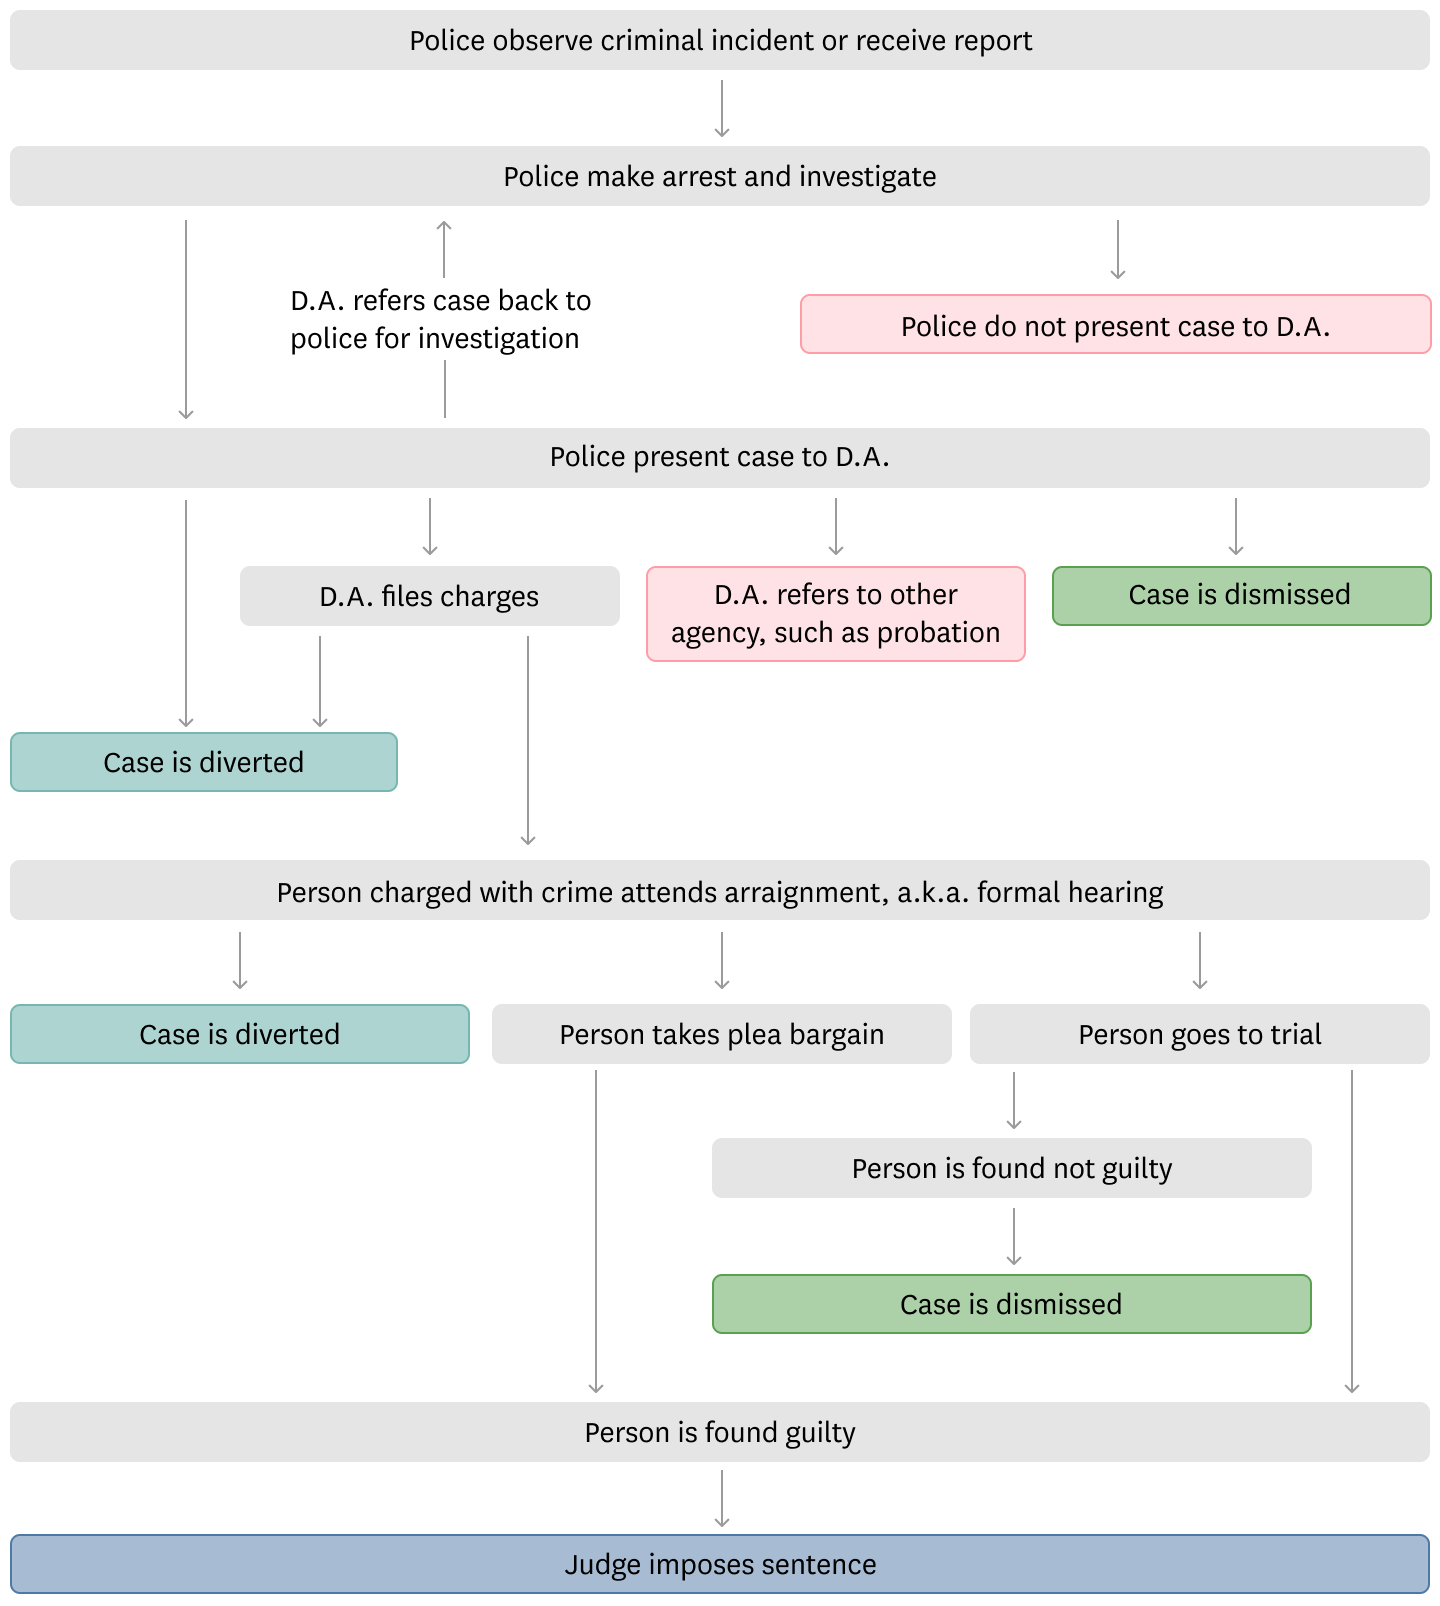 Flow chart that shows the proceess from when a crime is reported to when a case is dismissed, or a judge imposes a sentence